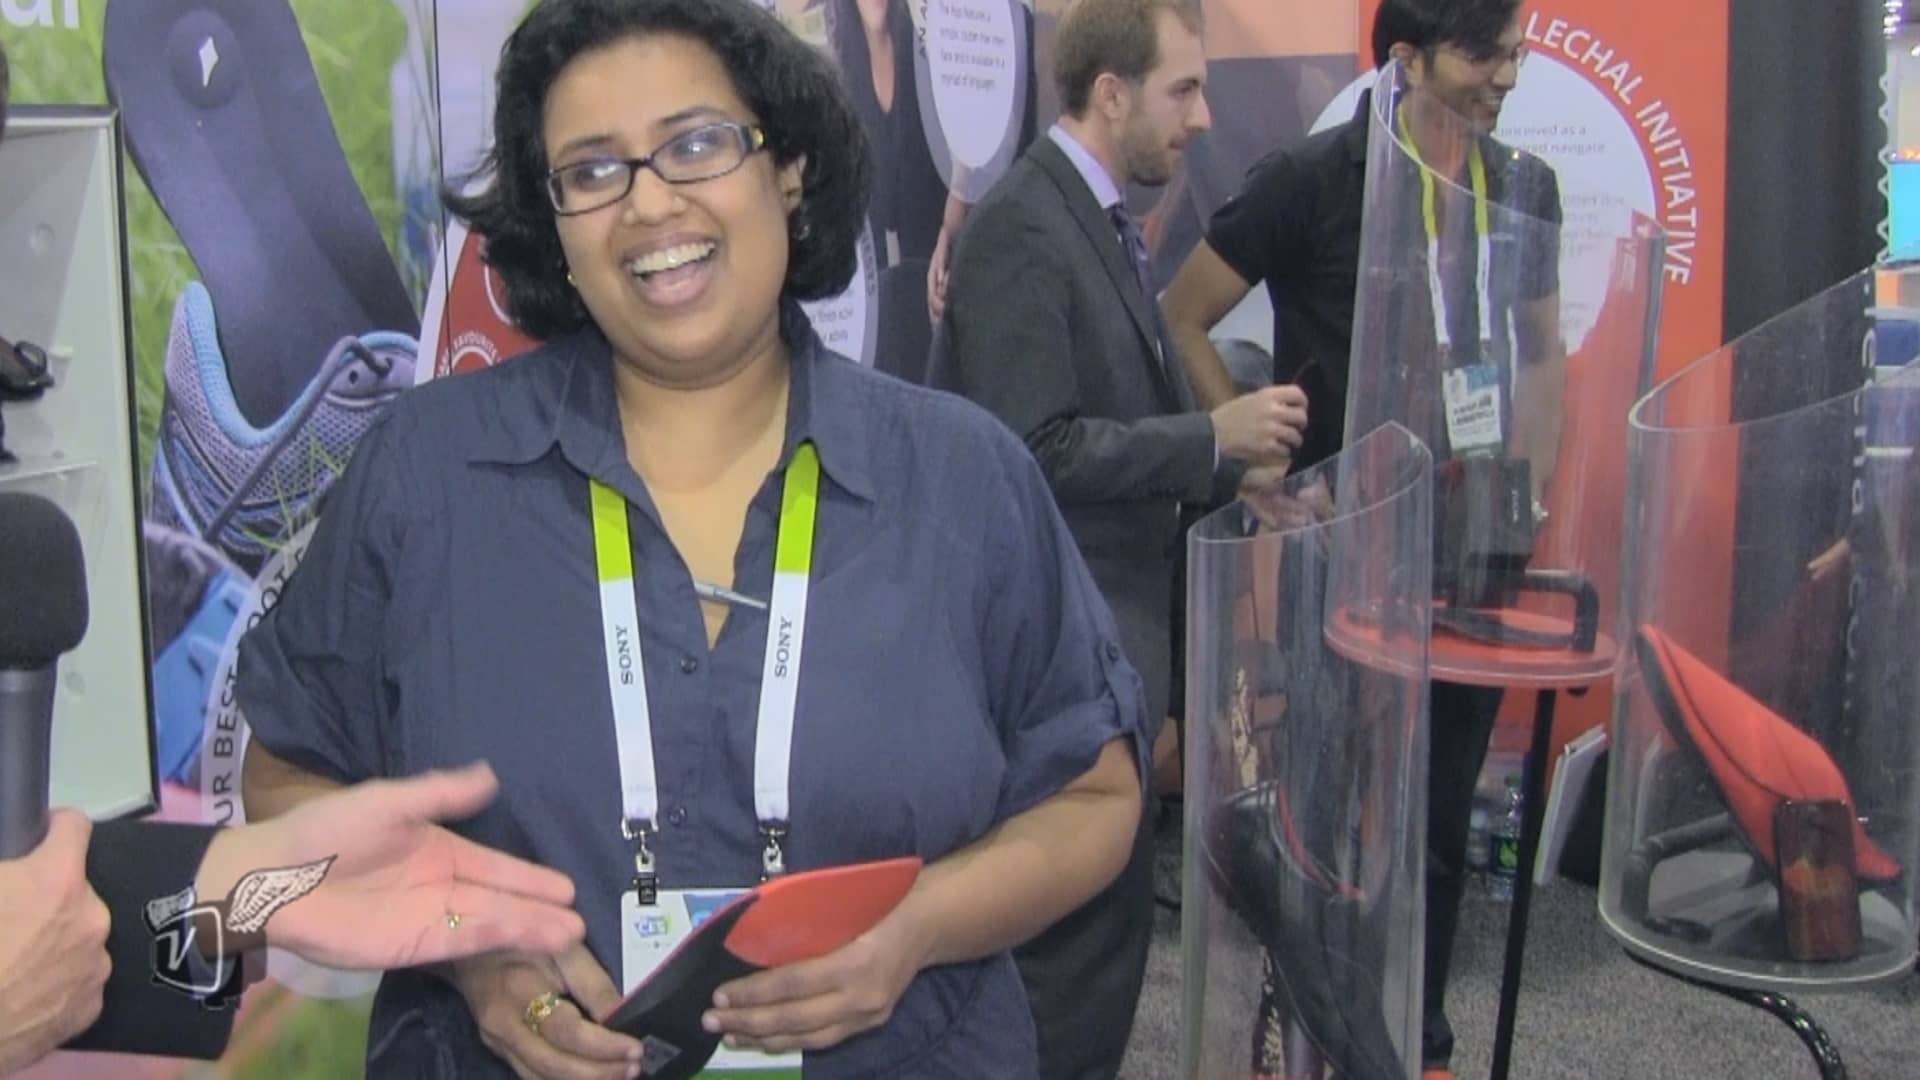 Sonia Benjamin of Lechal describes the Lechal insoles and shoes.